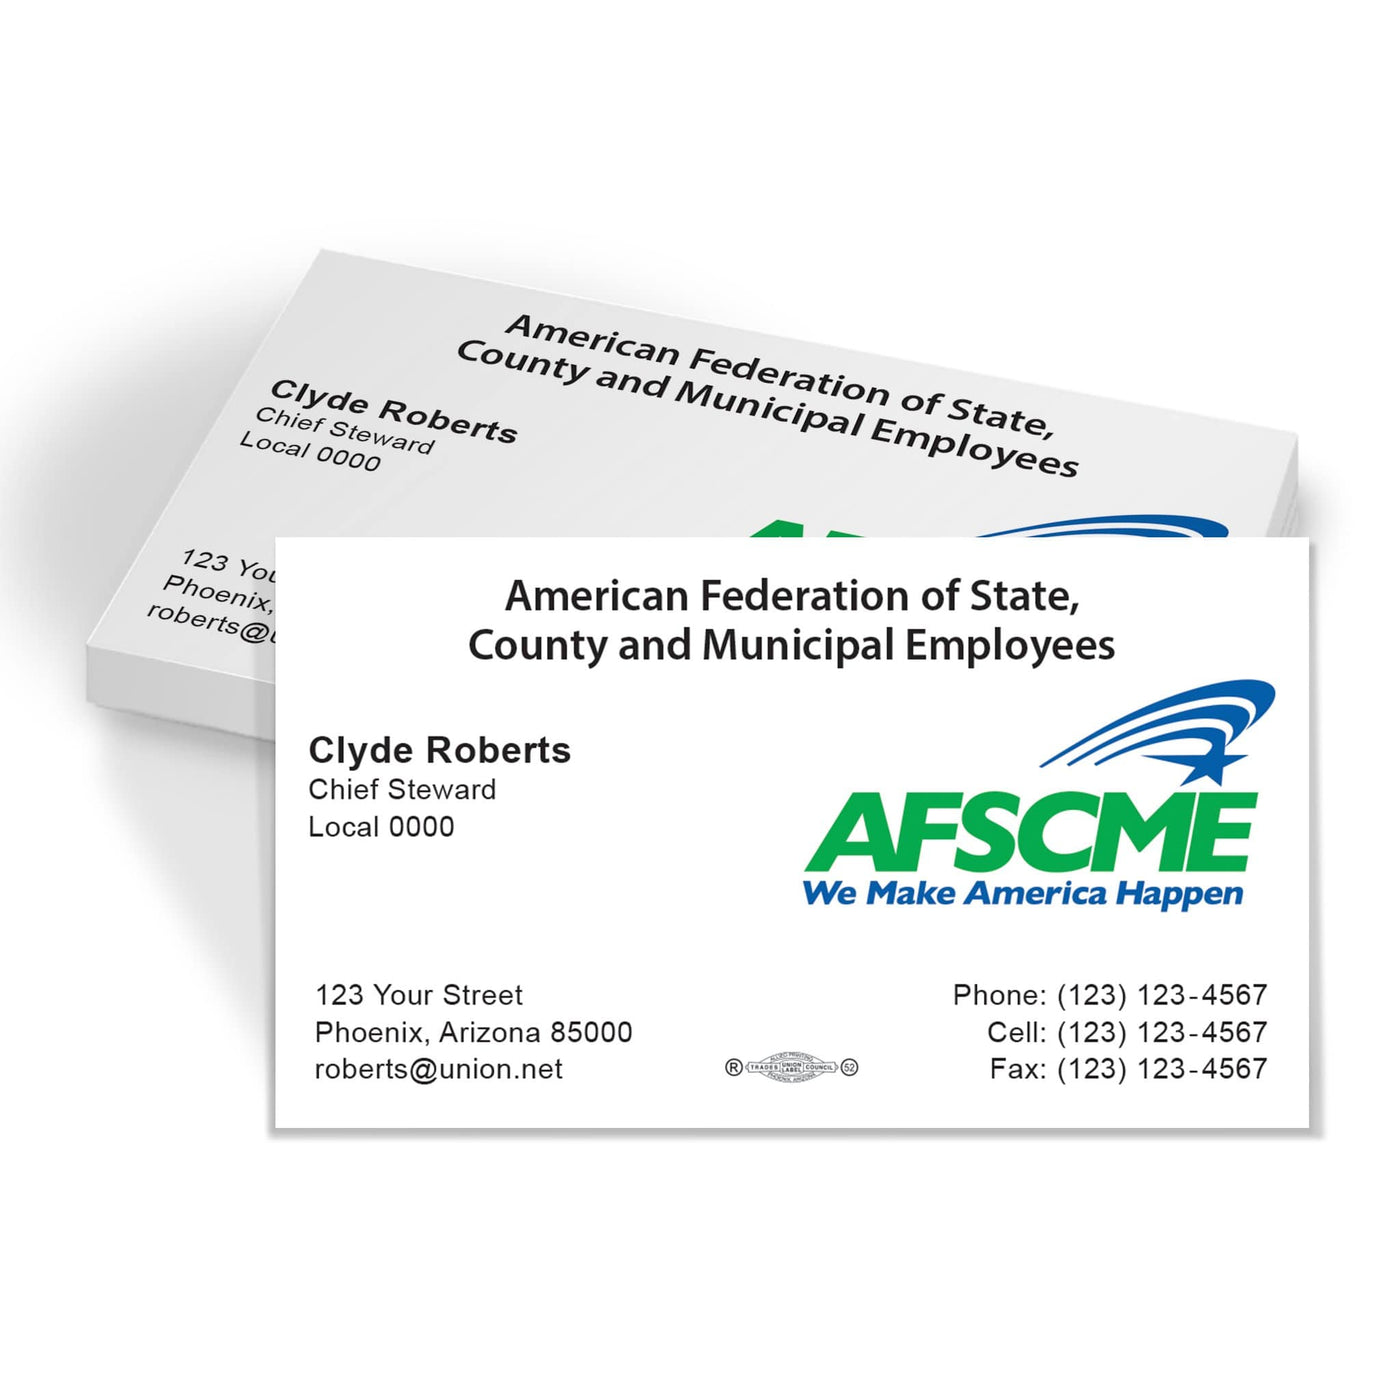 AFSCME Union Printed Business Cards - AFSCME-101